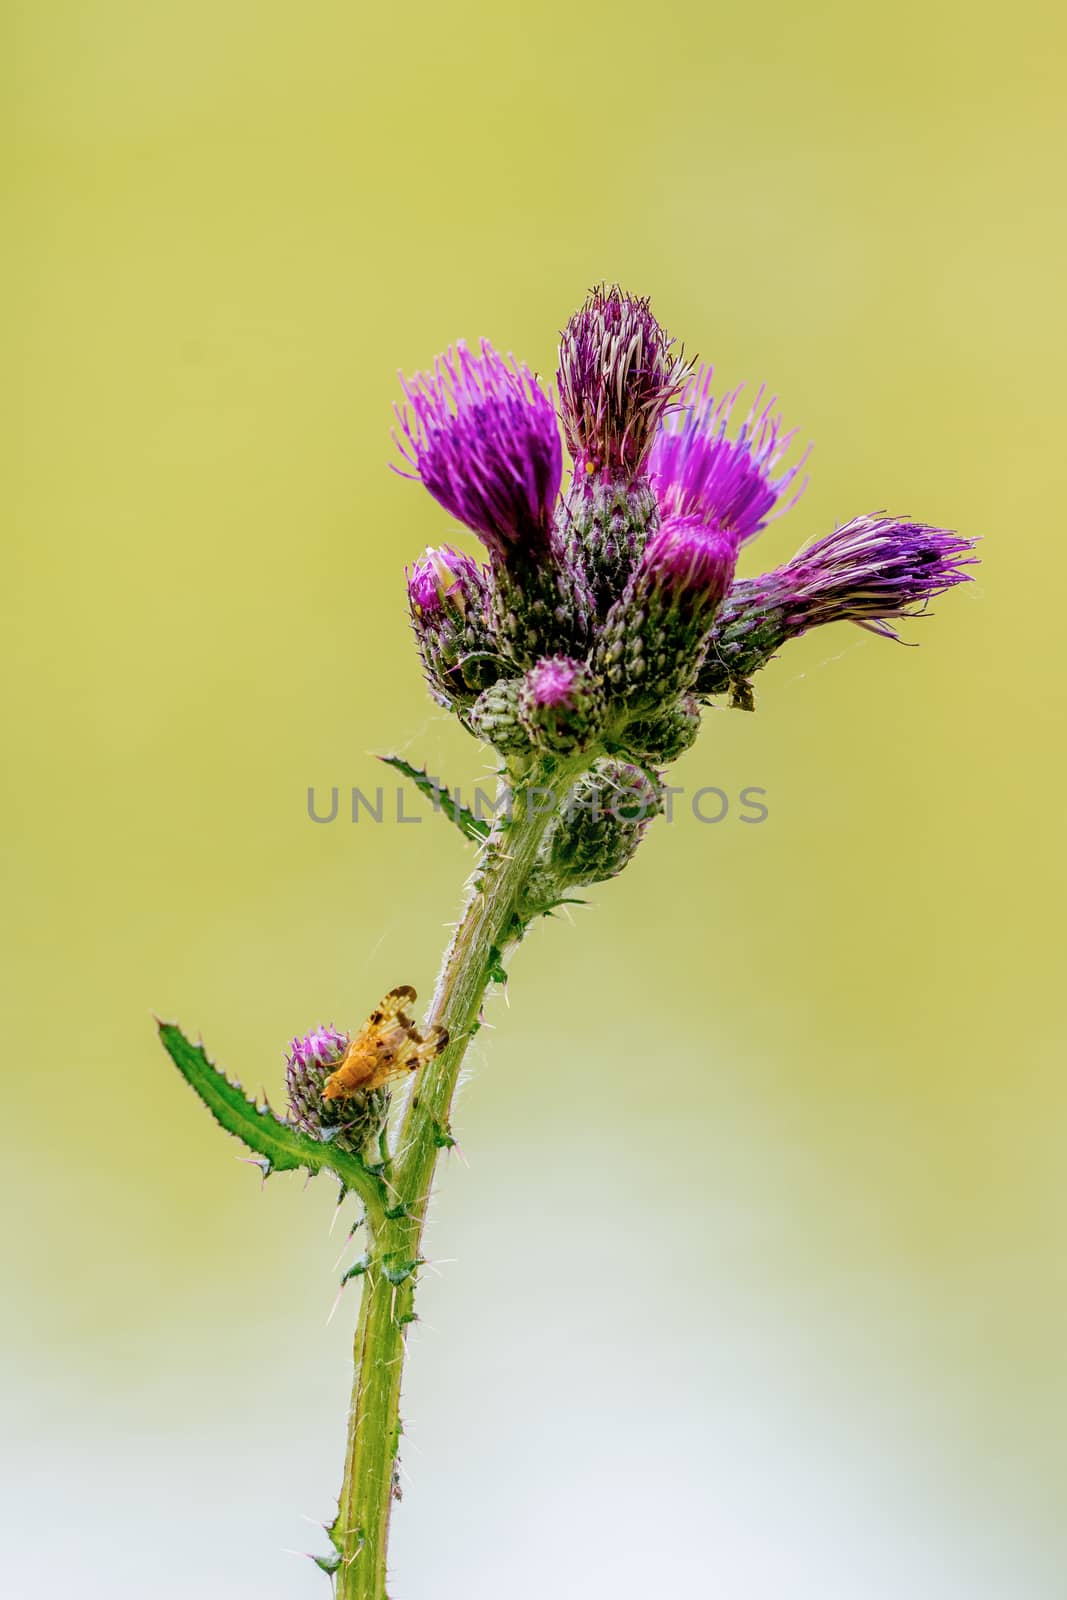 Yellow fly sitting on a flower violet thistle